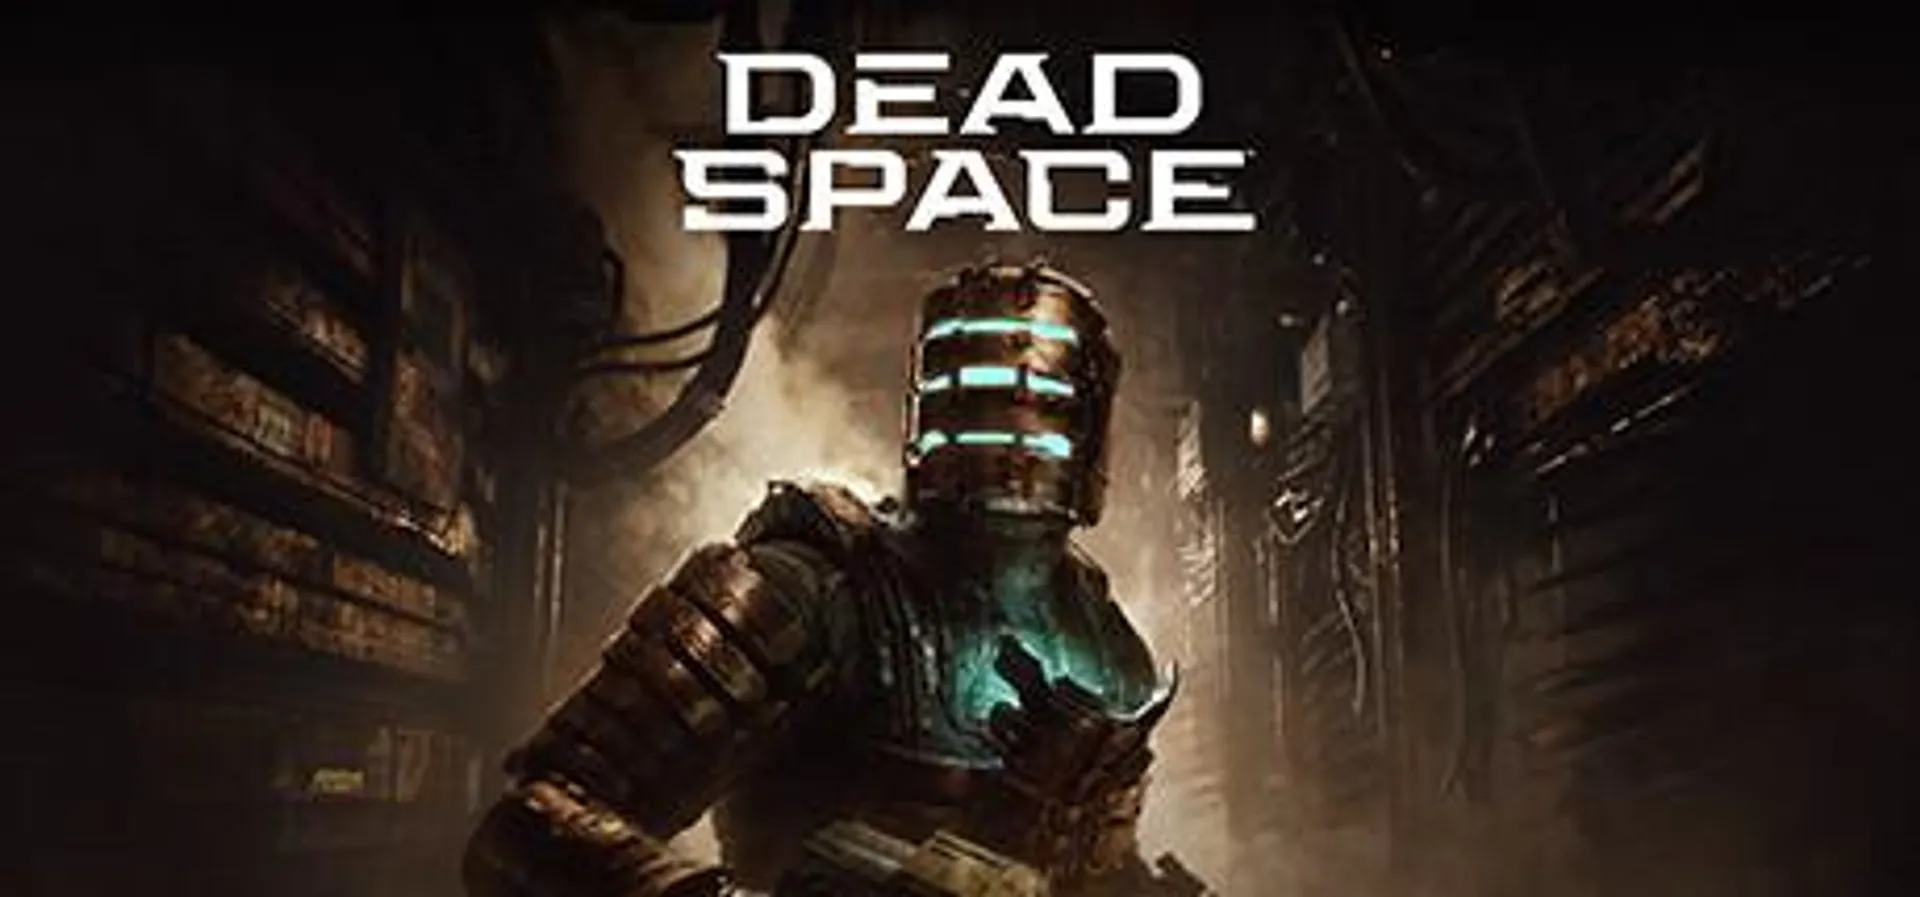 Save 60% on Dead Space on Steam